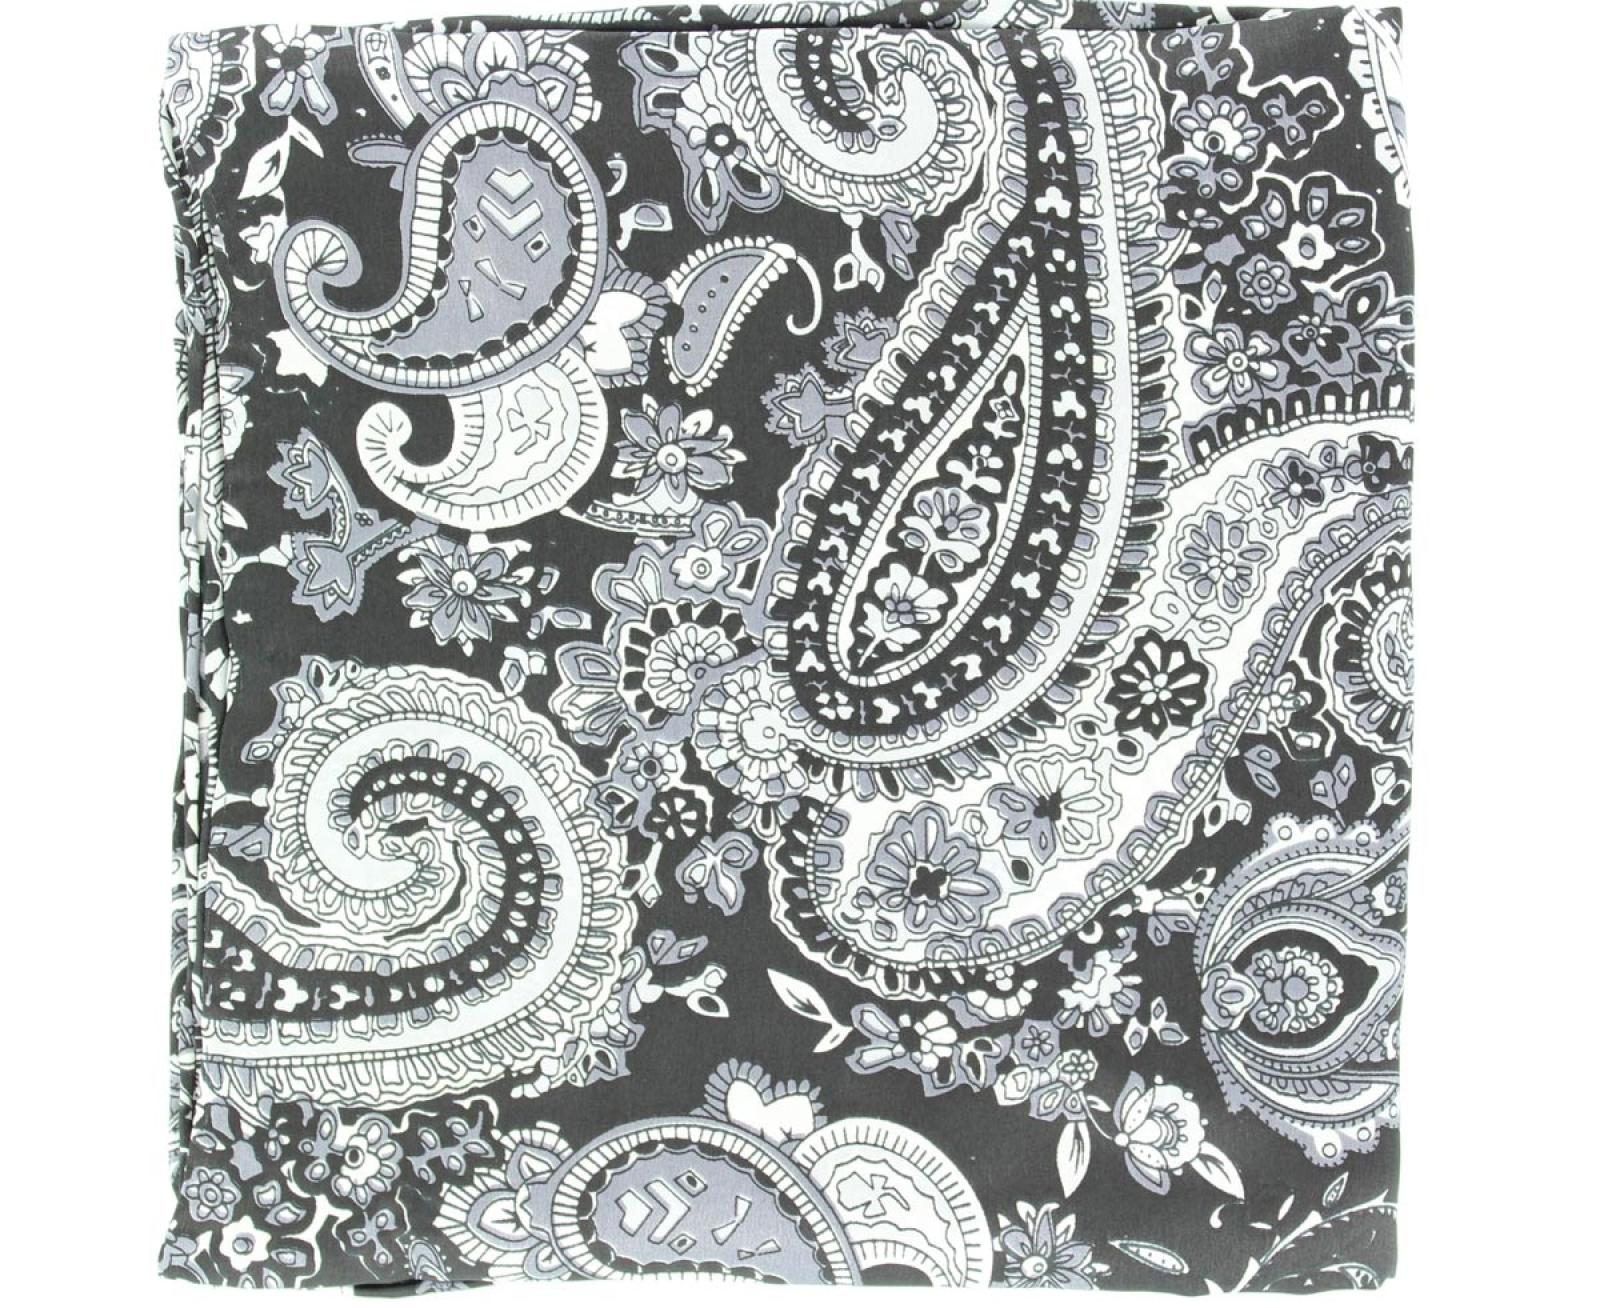 M&F Western Products Paisley Wild Rags Black